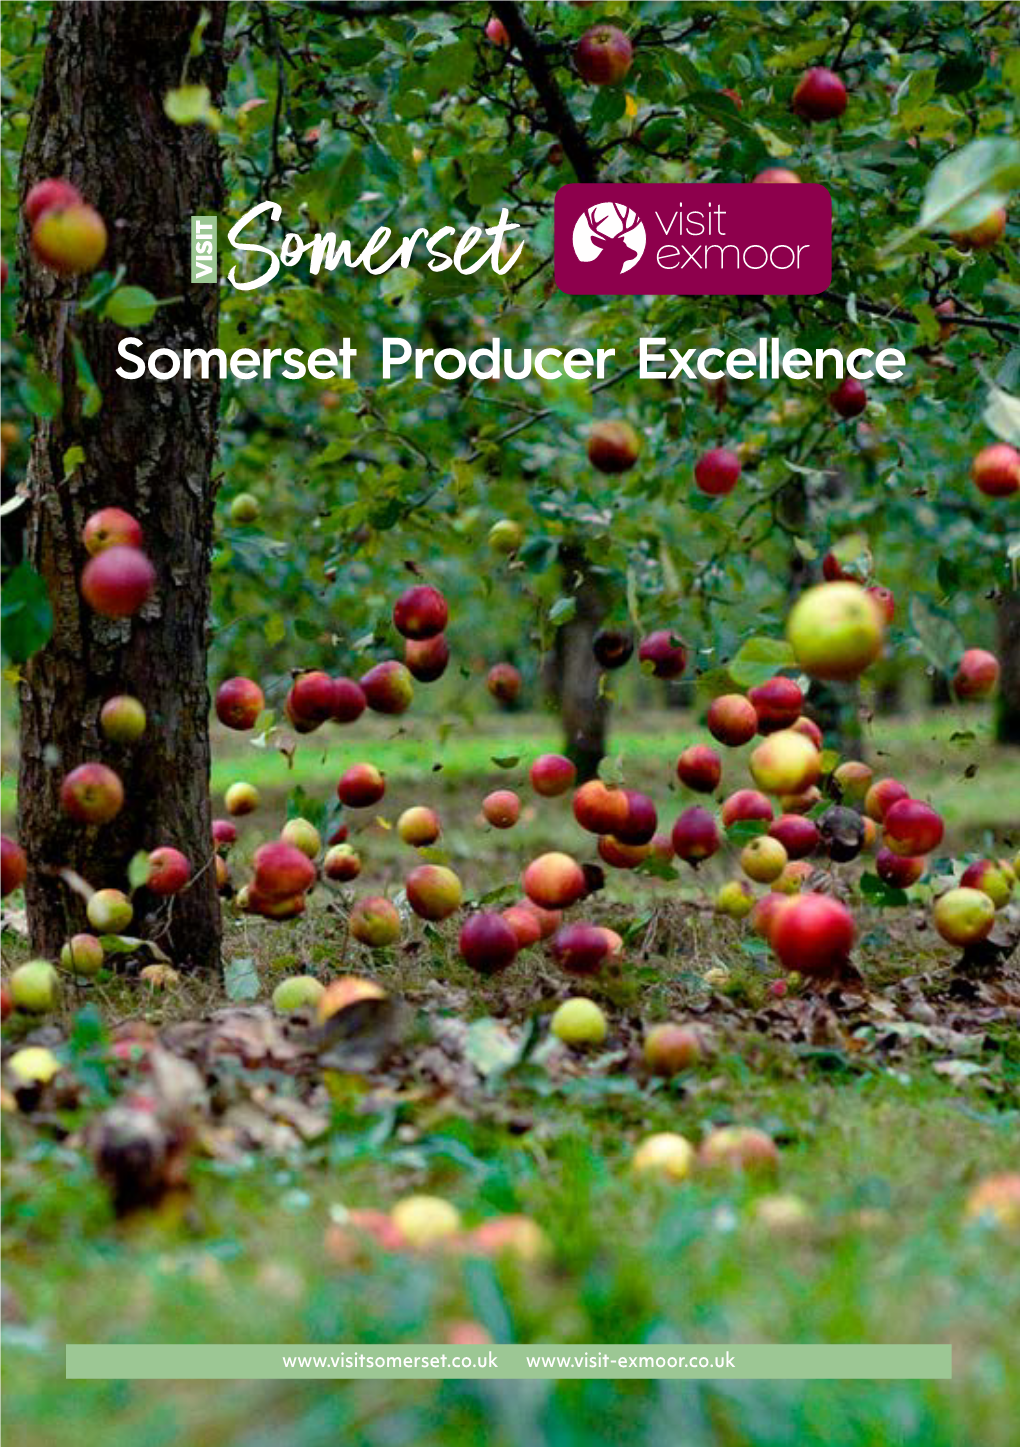 Somerset Producer Excellence